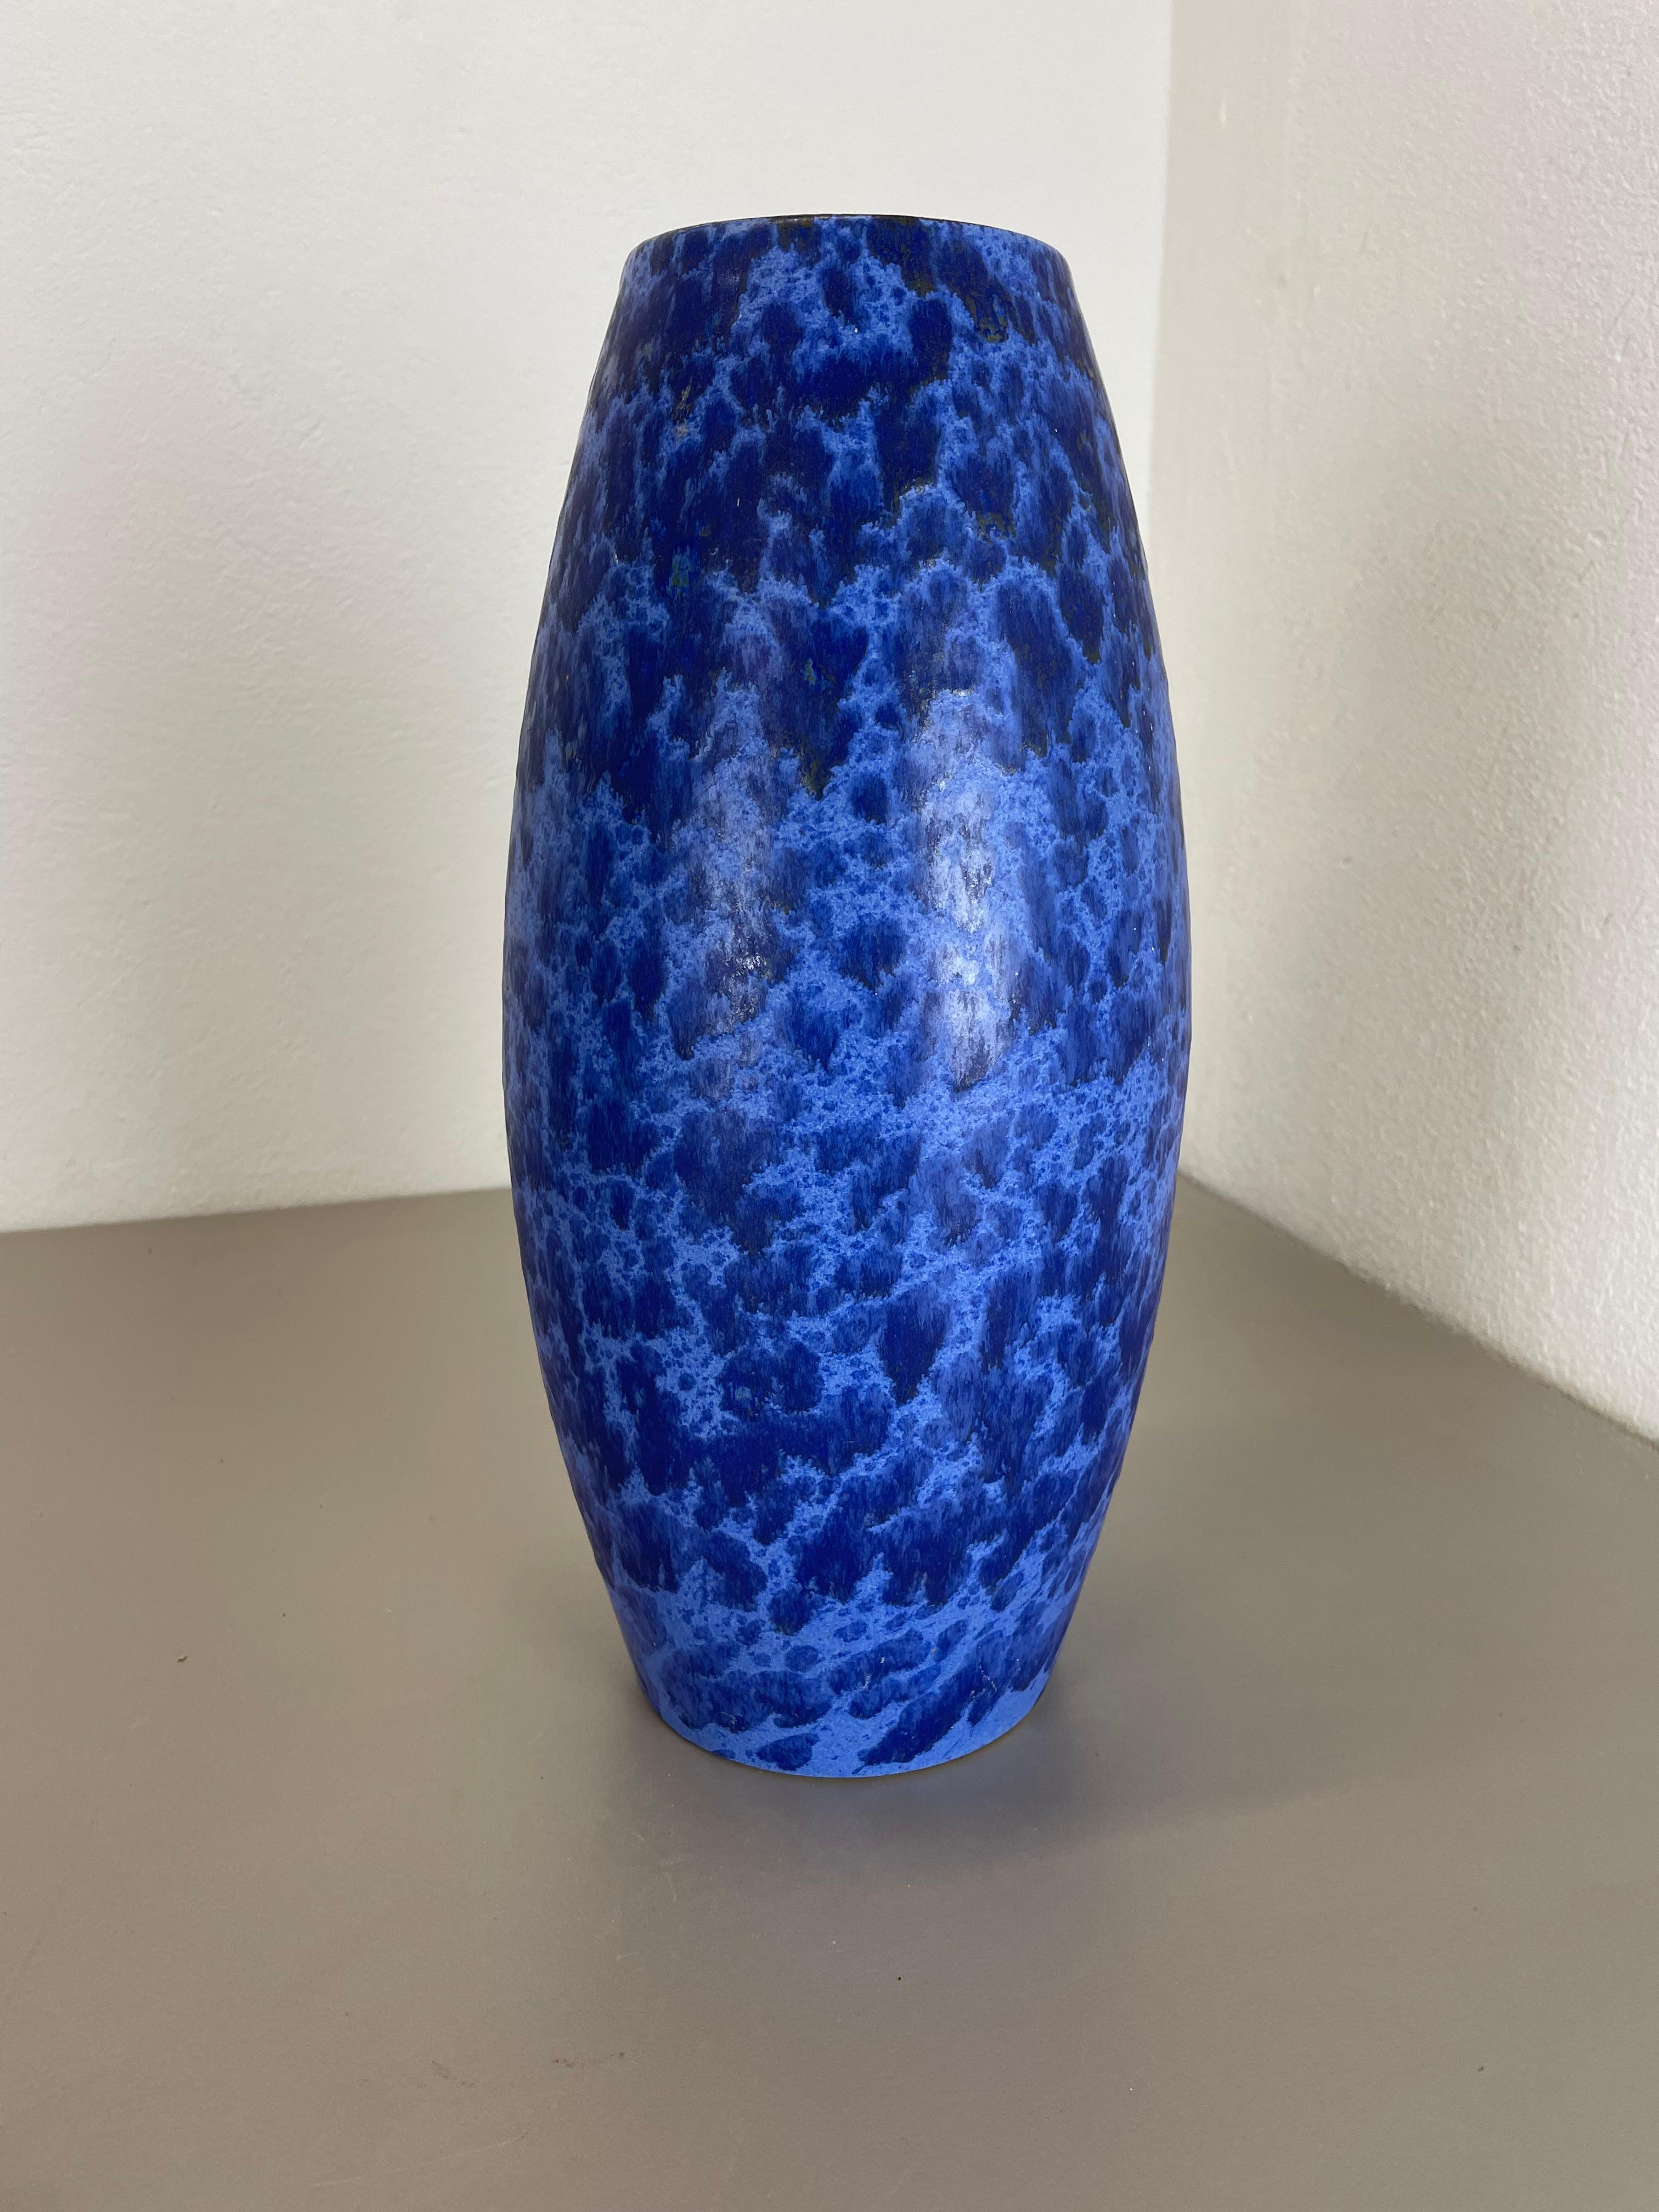 Article:

Fat lava art vase extra large version


Producer:

Scheurich, Germany



Decade:

1970s


Description:

This original vintage vase was produced in the 1970s in Germany. It is made of ceramic pottery in fat lava optic with abstract